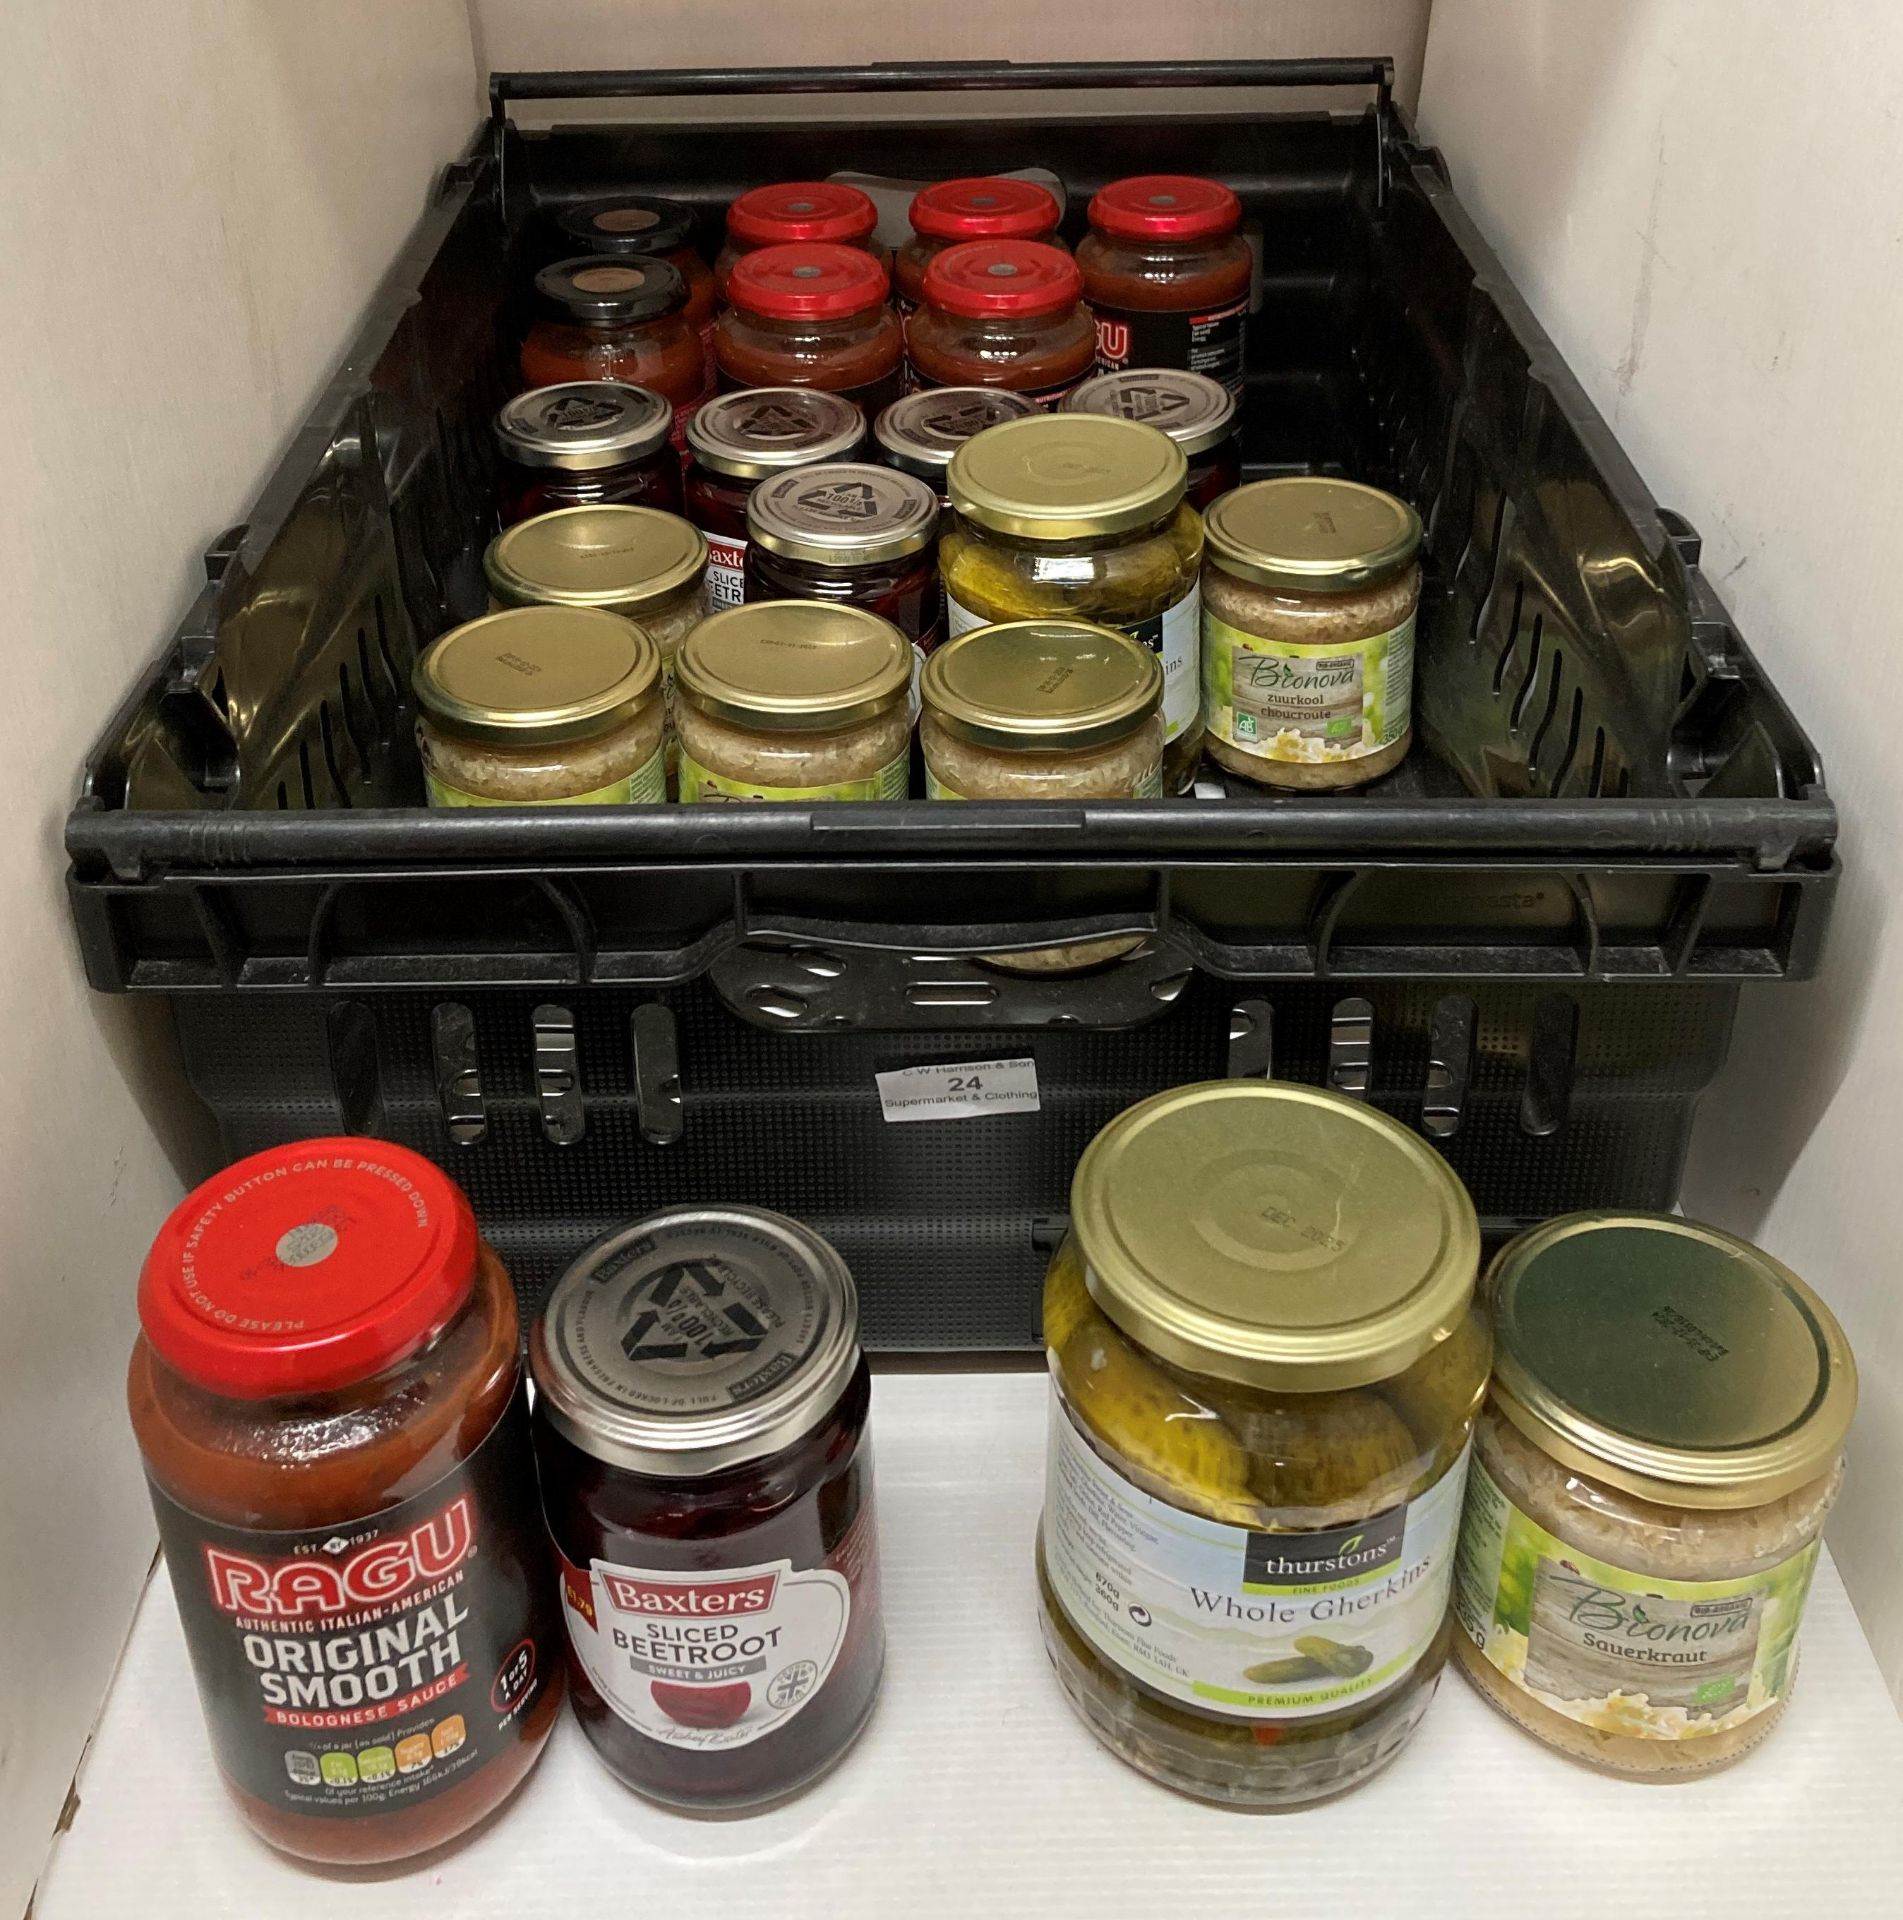 Contents to tray - 22 x assorted jars and bottles - pickled gherkins, sauerkraut, beetroot, ragu,